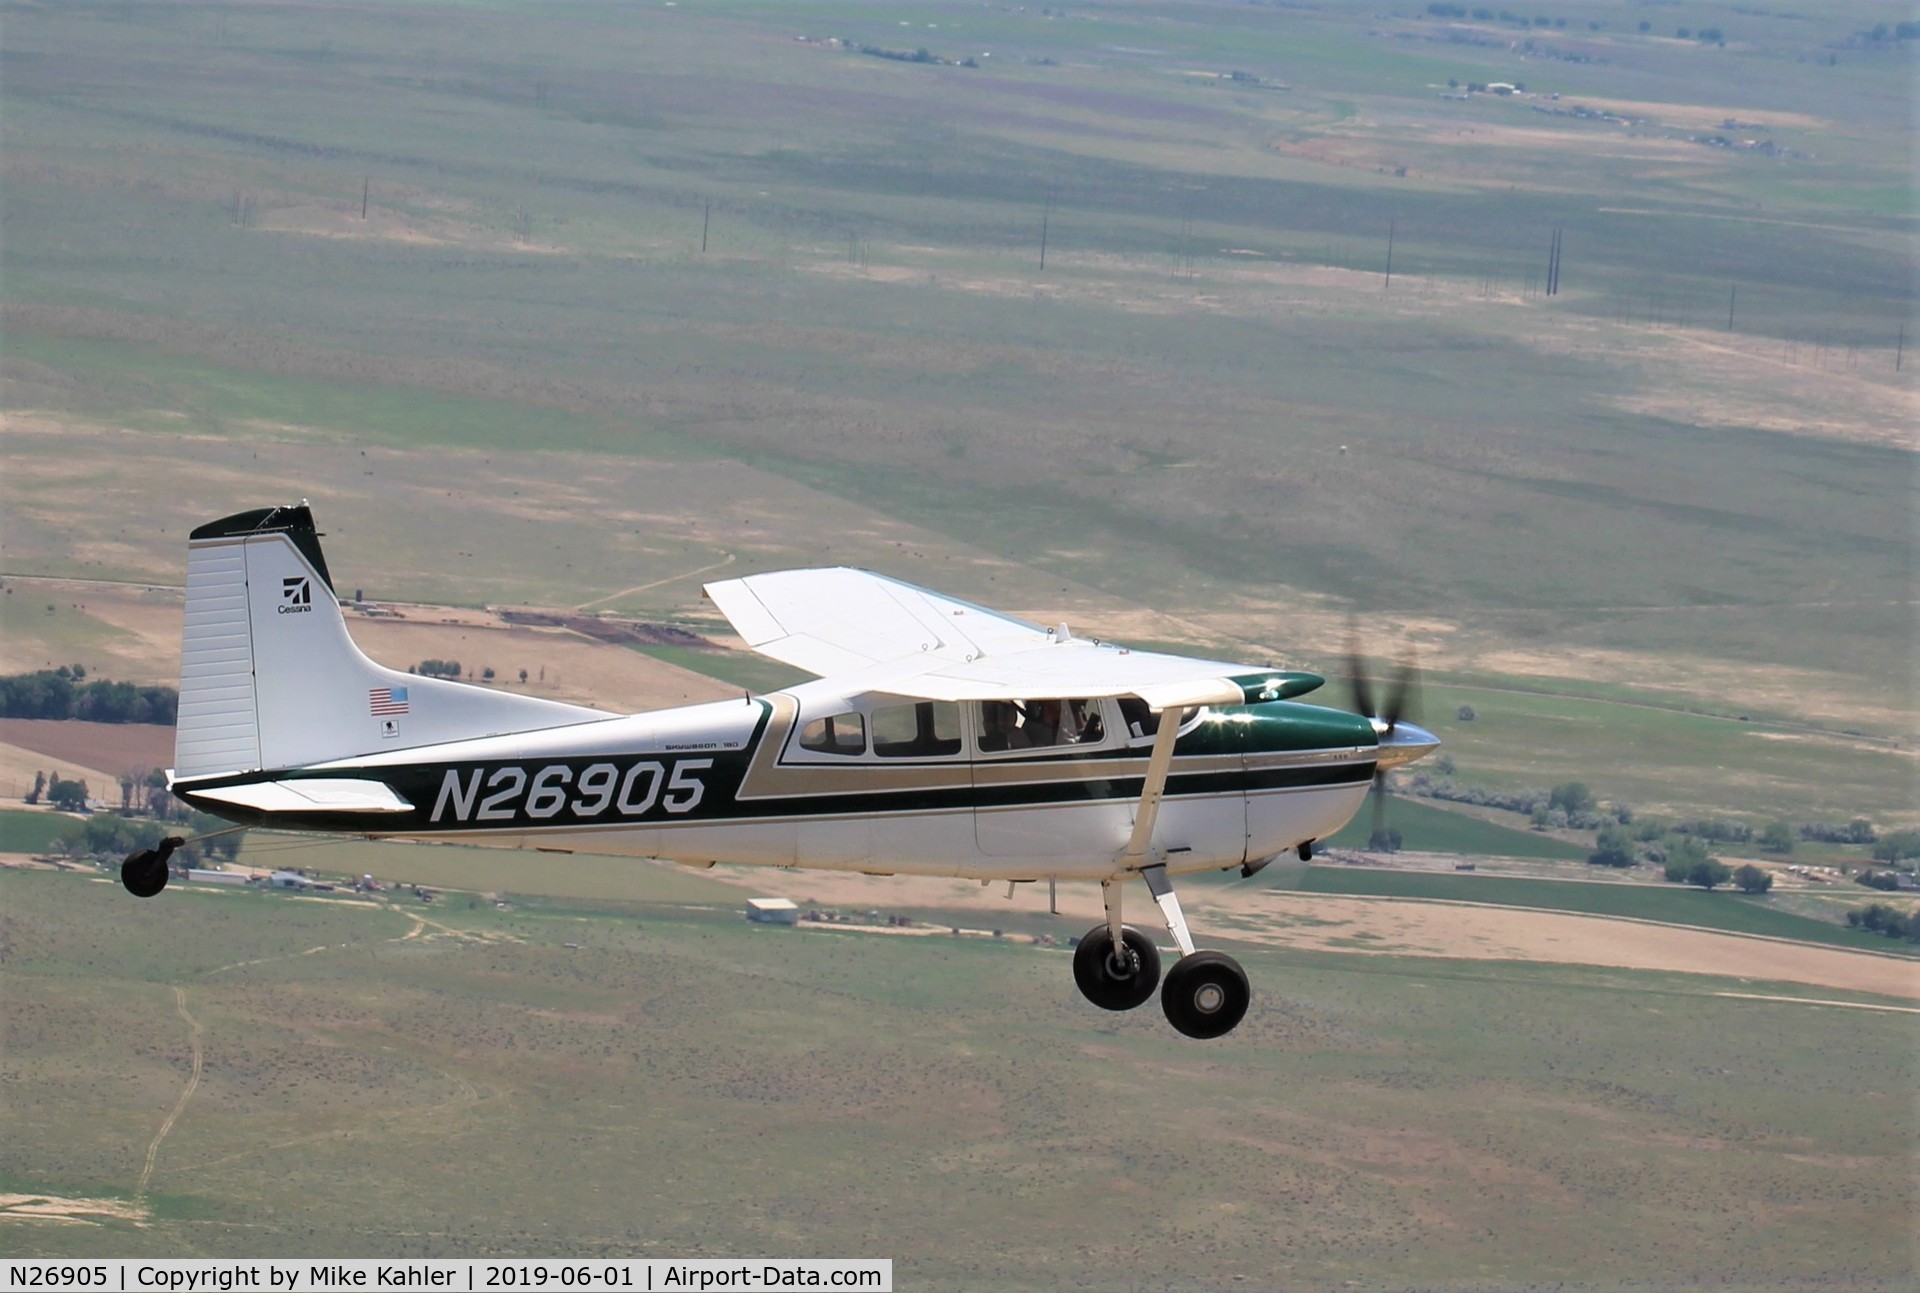 N26905, Cessna 180 C/N 18051354, on the way to penny's airfield.